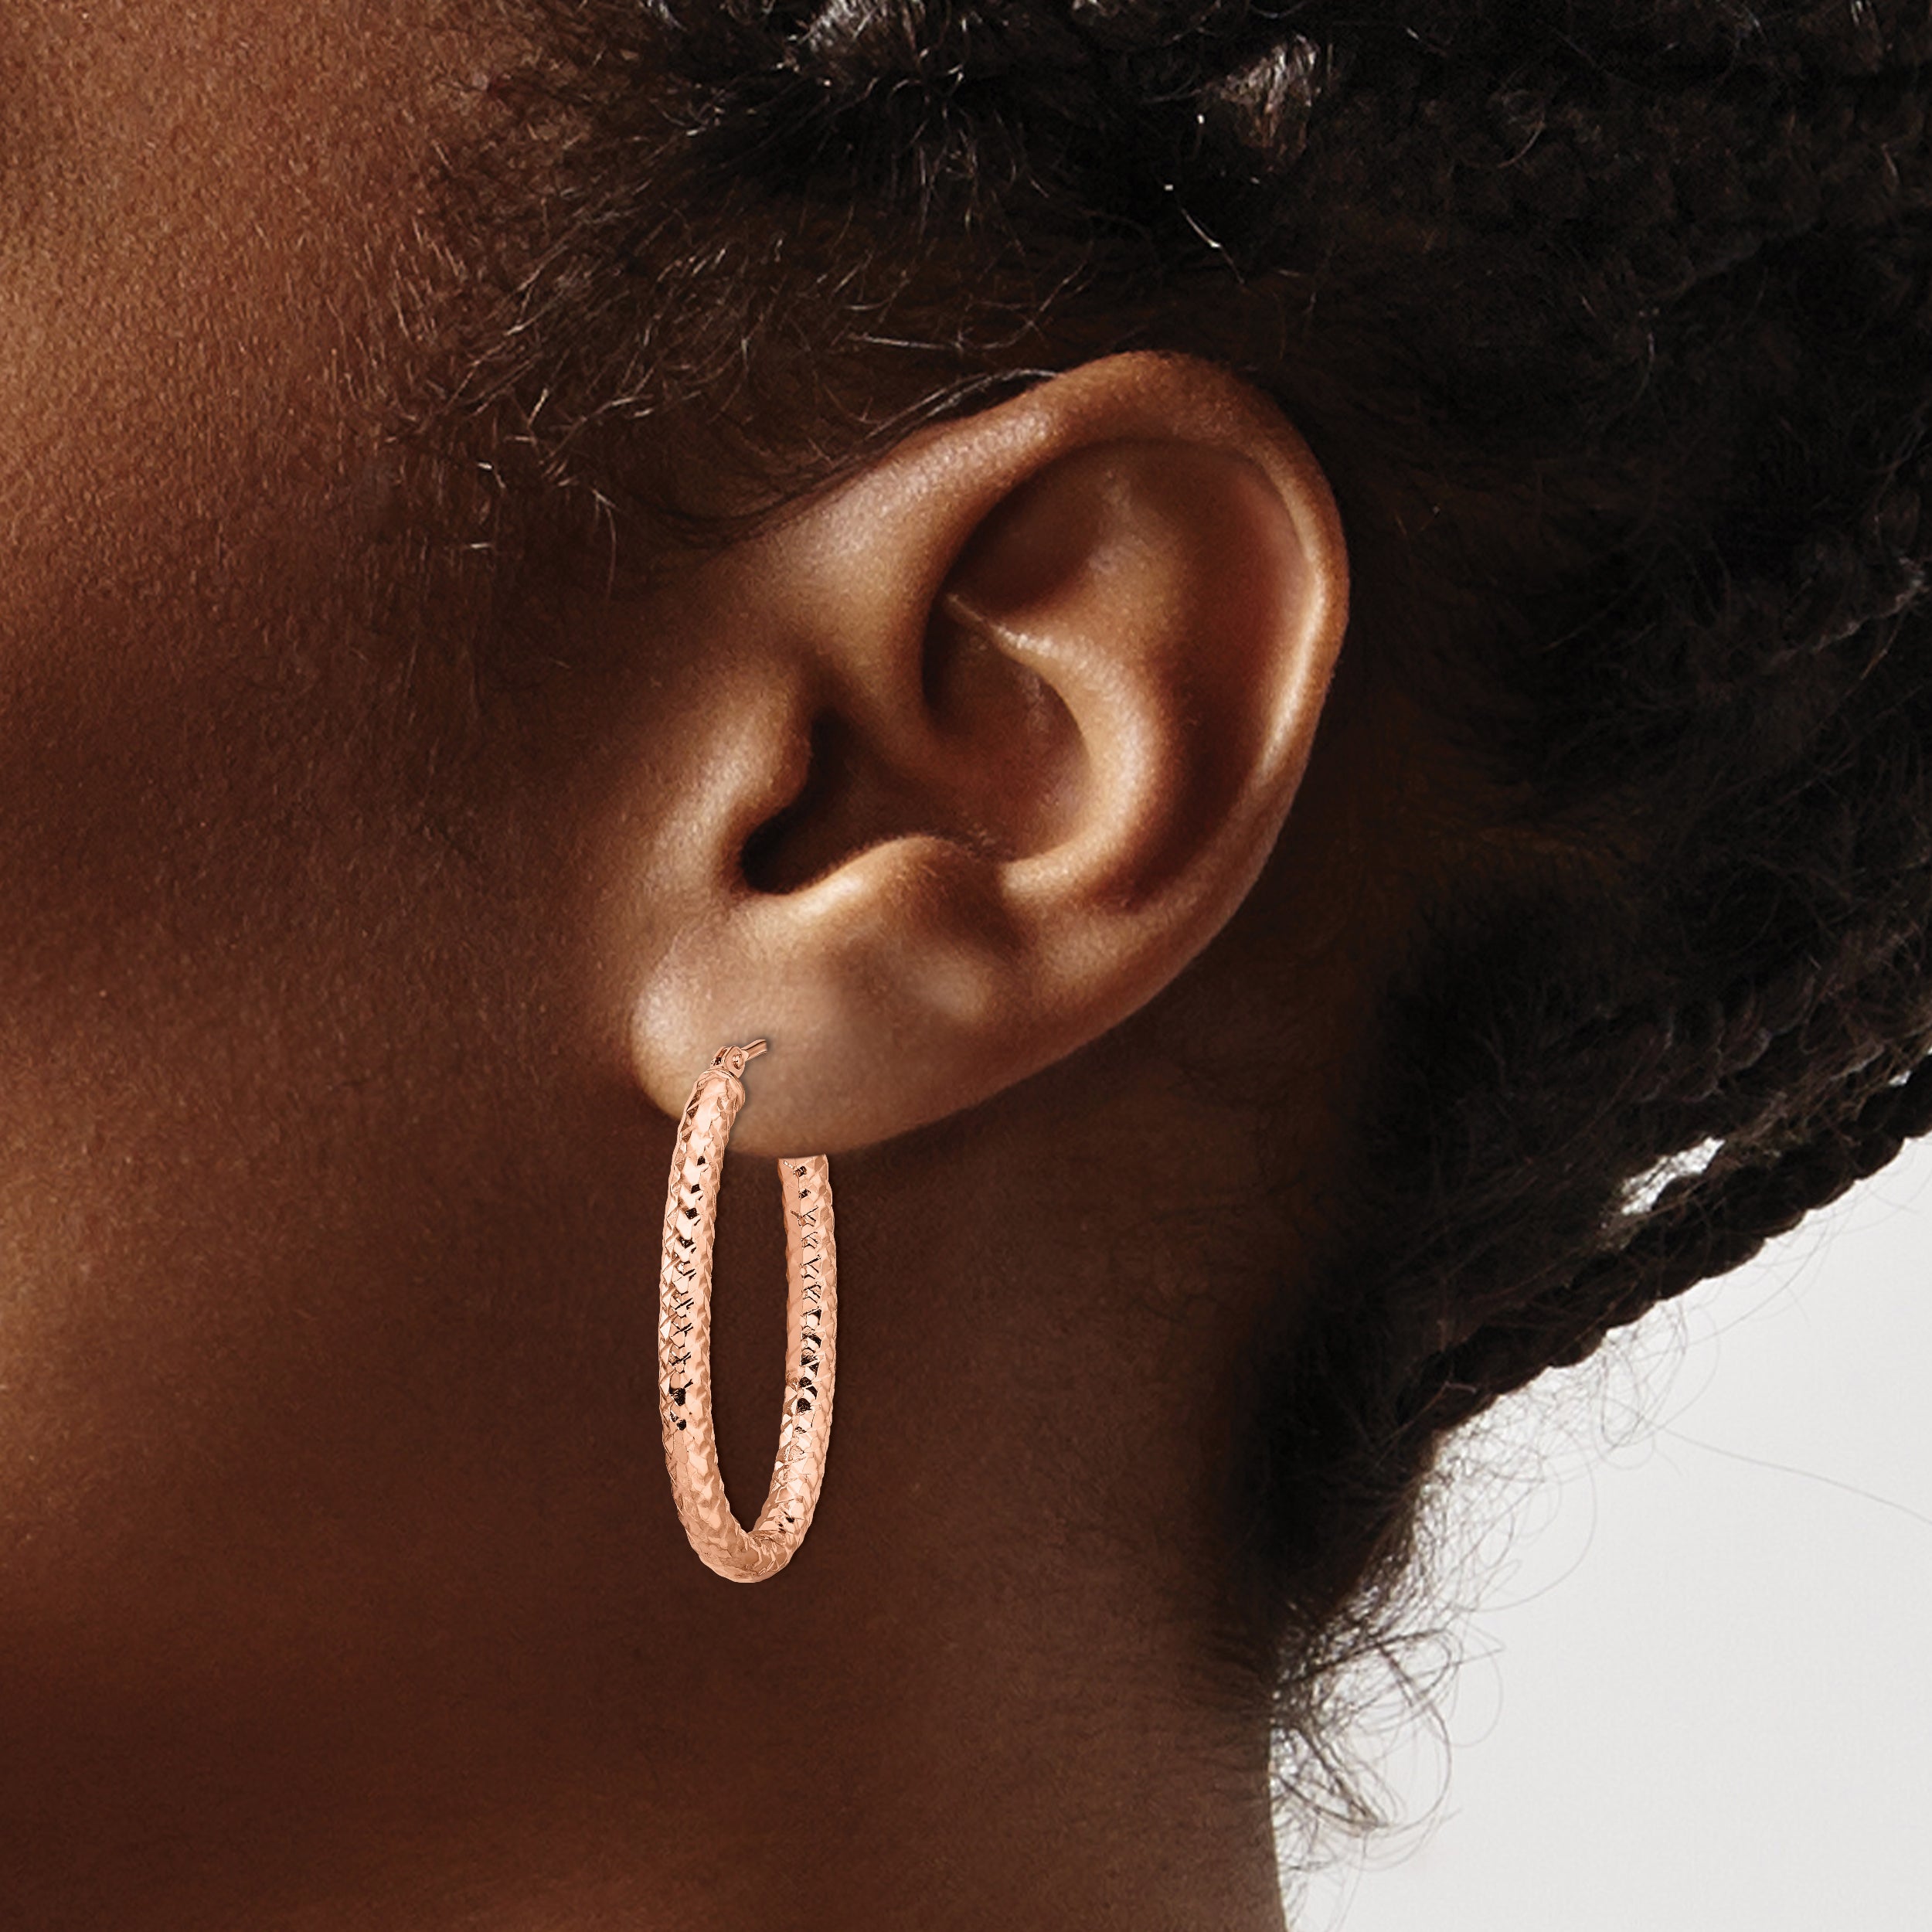 14K ForeverLite Rose Gold Polished and Textured Earrings